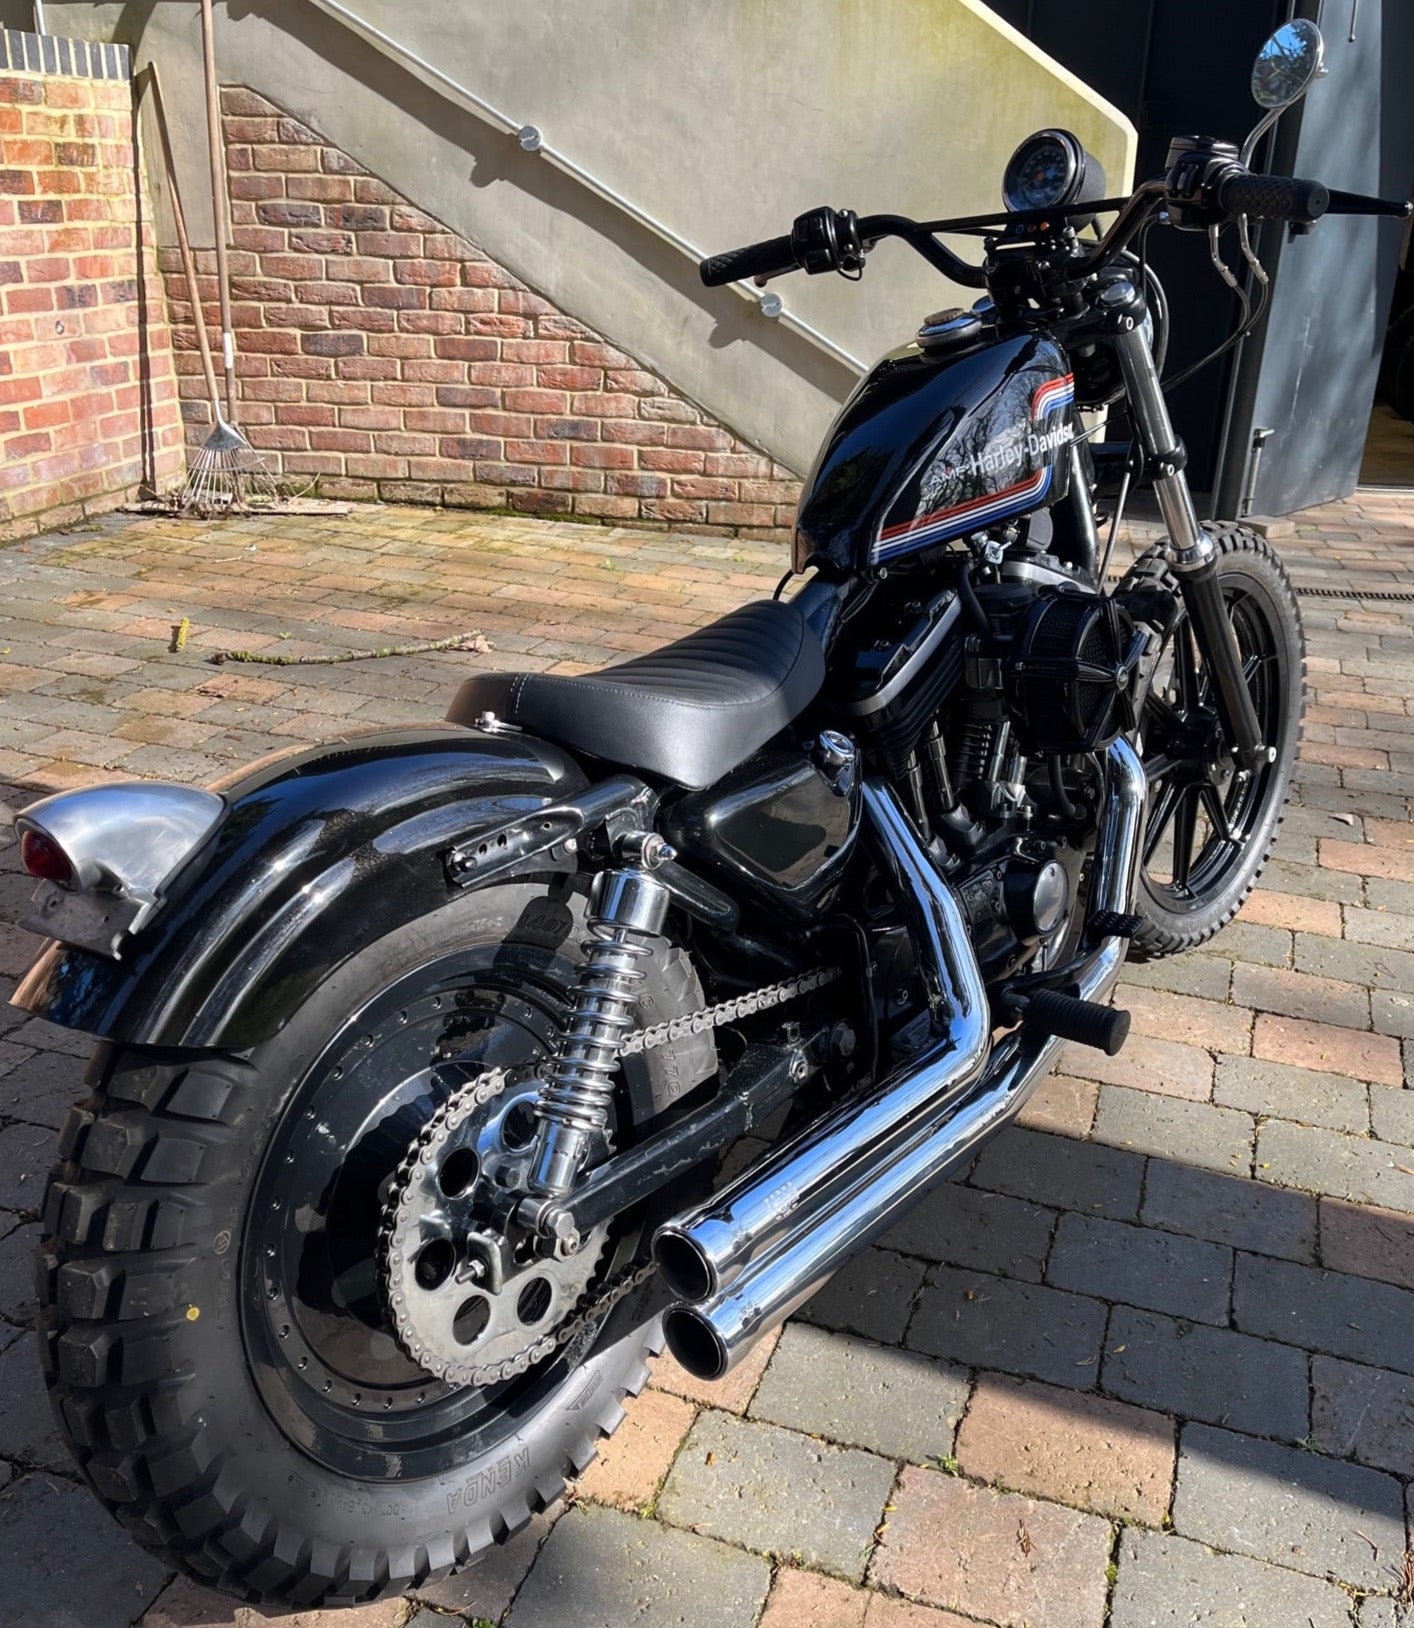 1988 Sportster 1200cc - SOLD